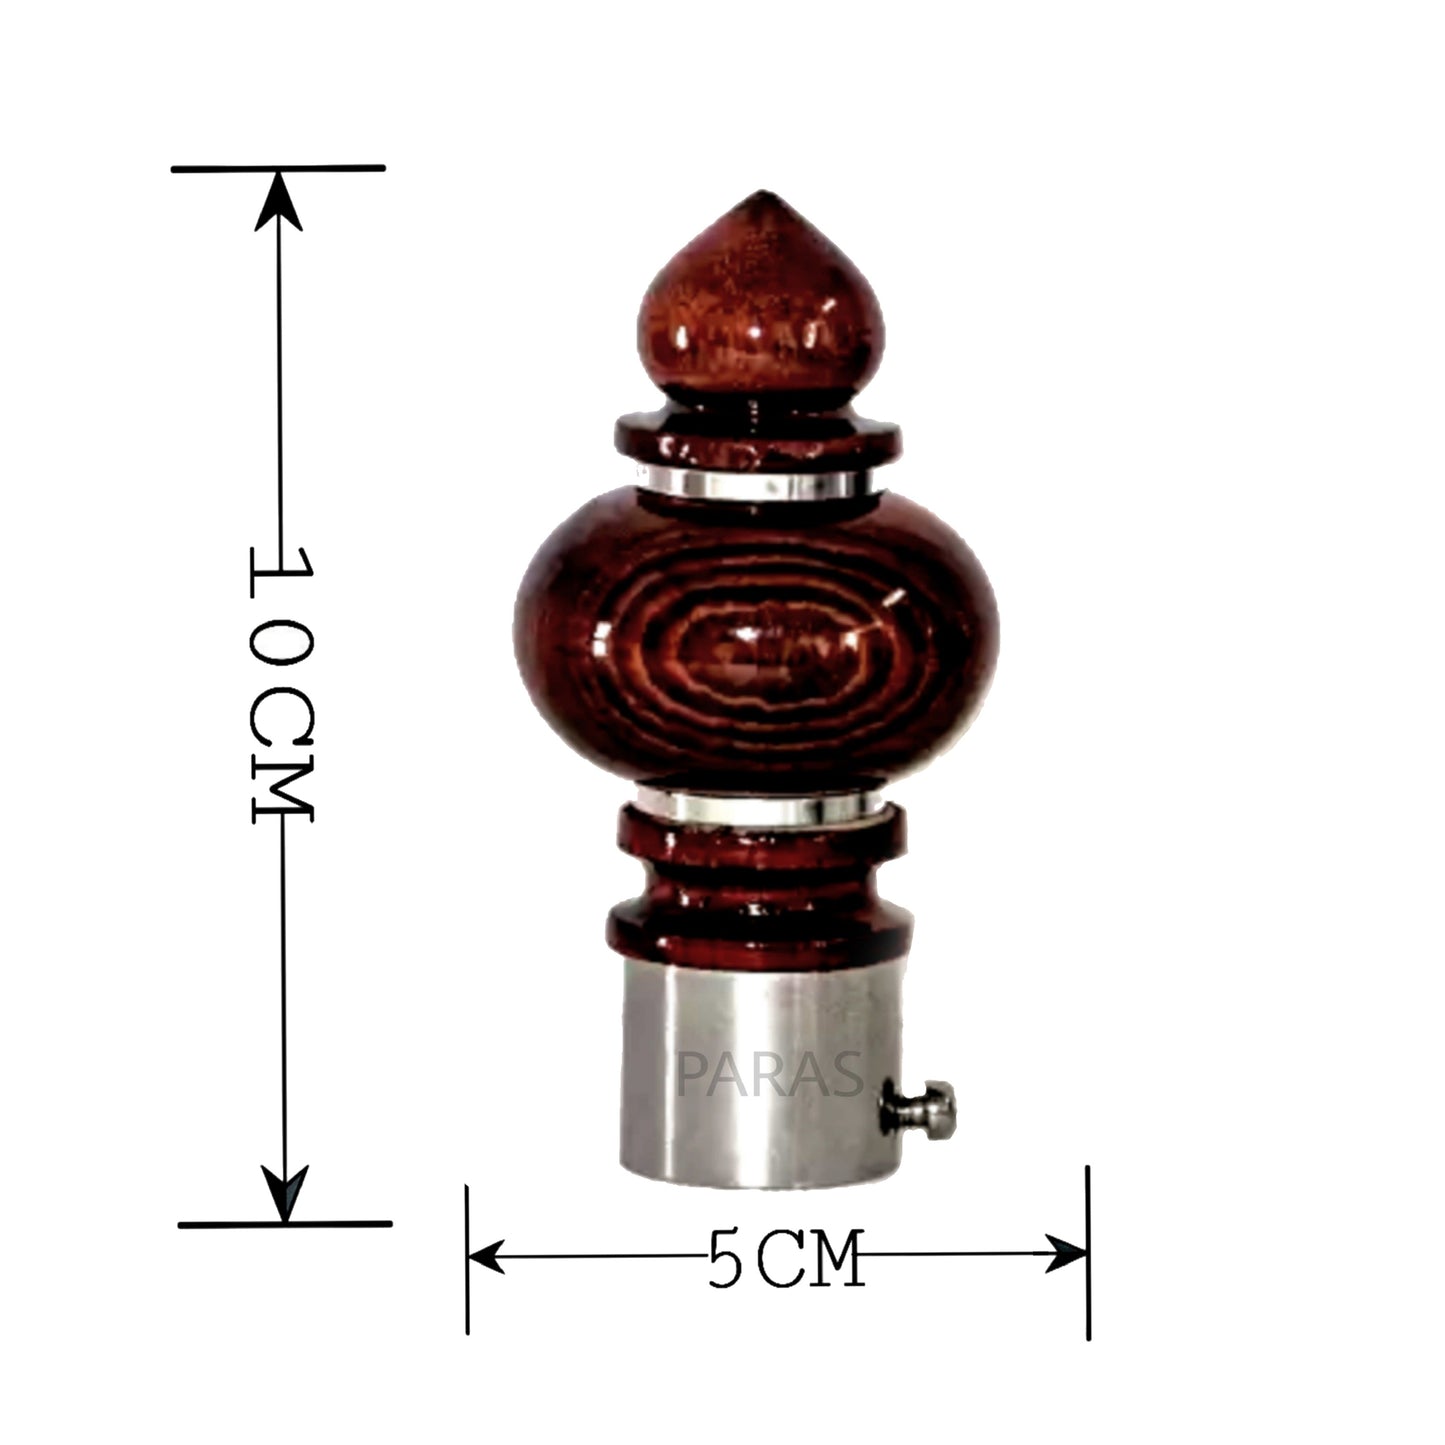 Buy Paras Wooden Stainless Steel Curtain Finials Only